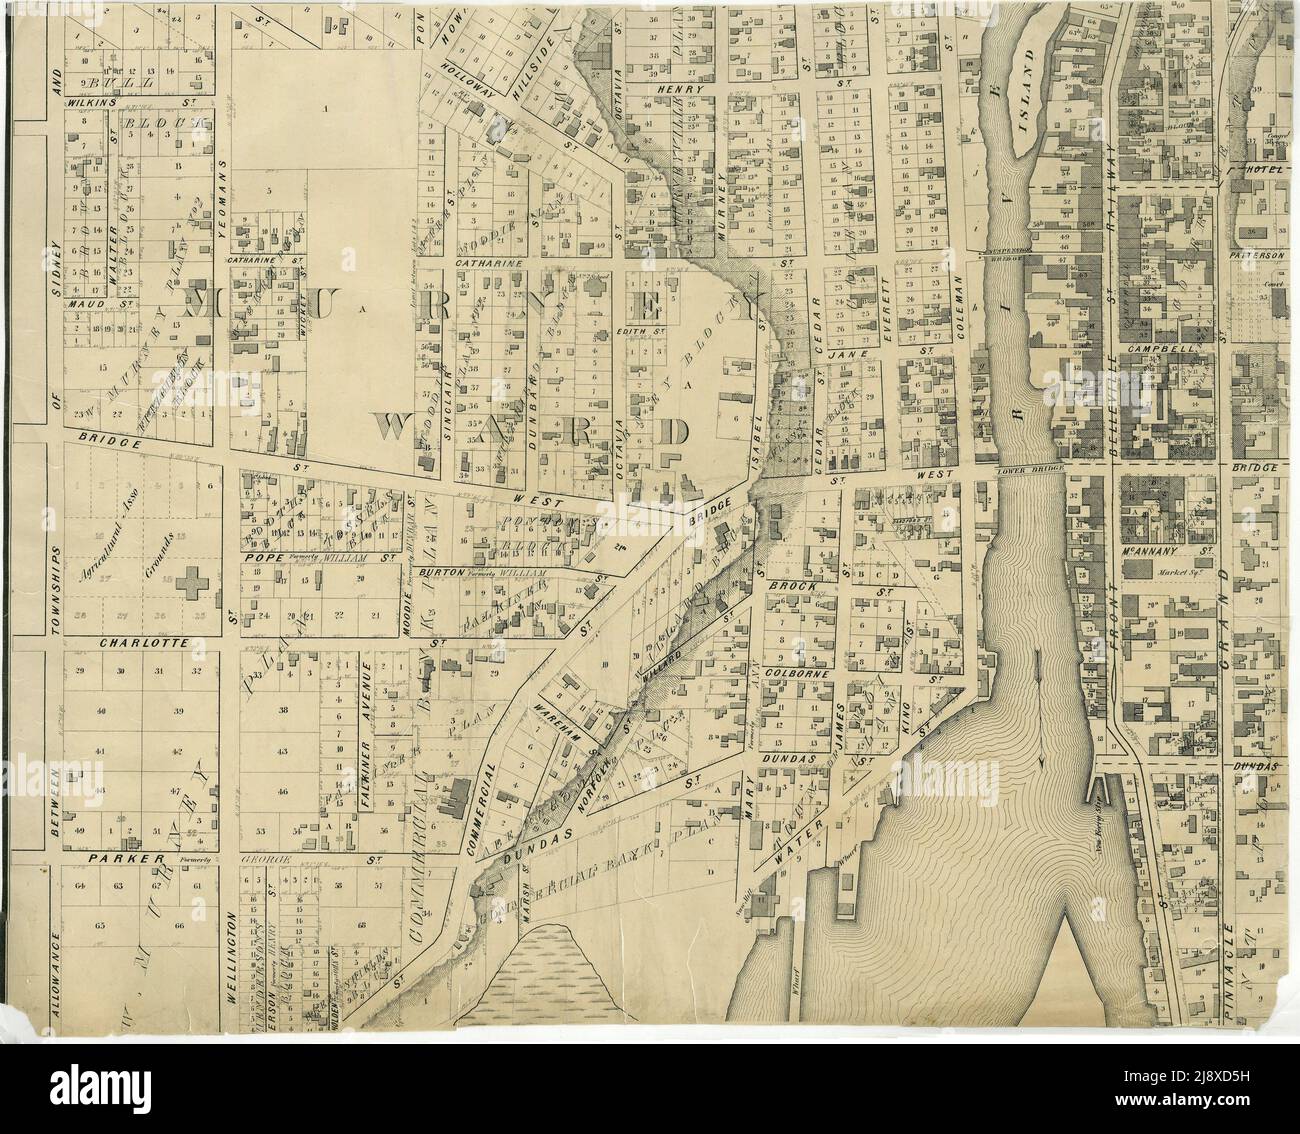 Part of the 1877 Map of the City of Belleville, Township of Thurlow, County of Hastings, Ontario, by Evans & Bolger, surveyors.  ca.  1877 Stock Photo